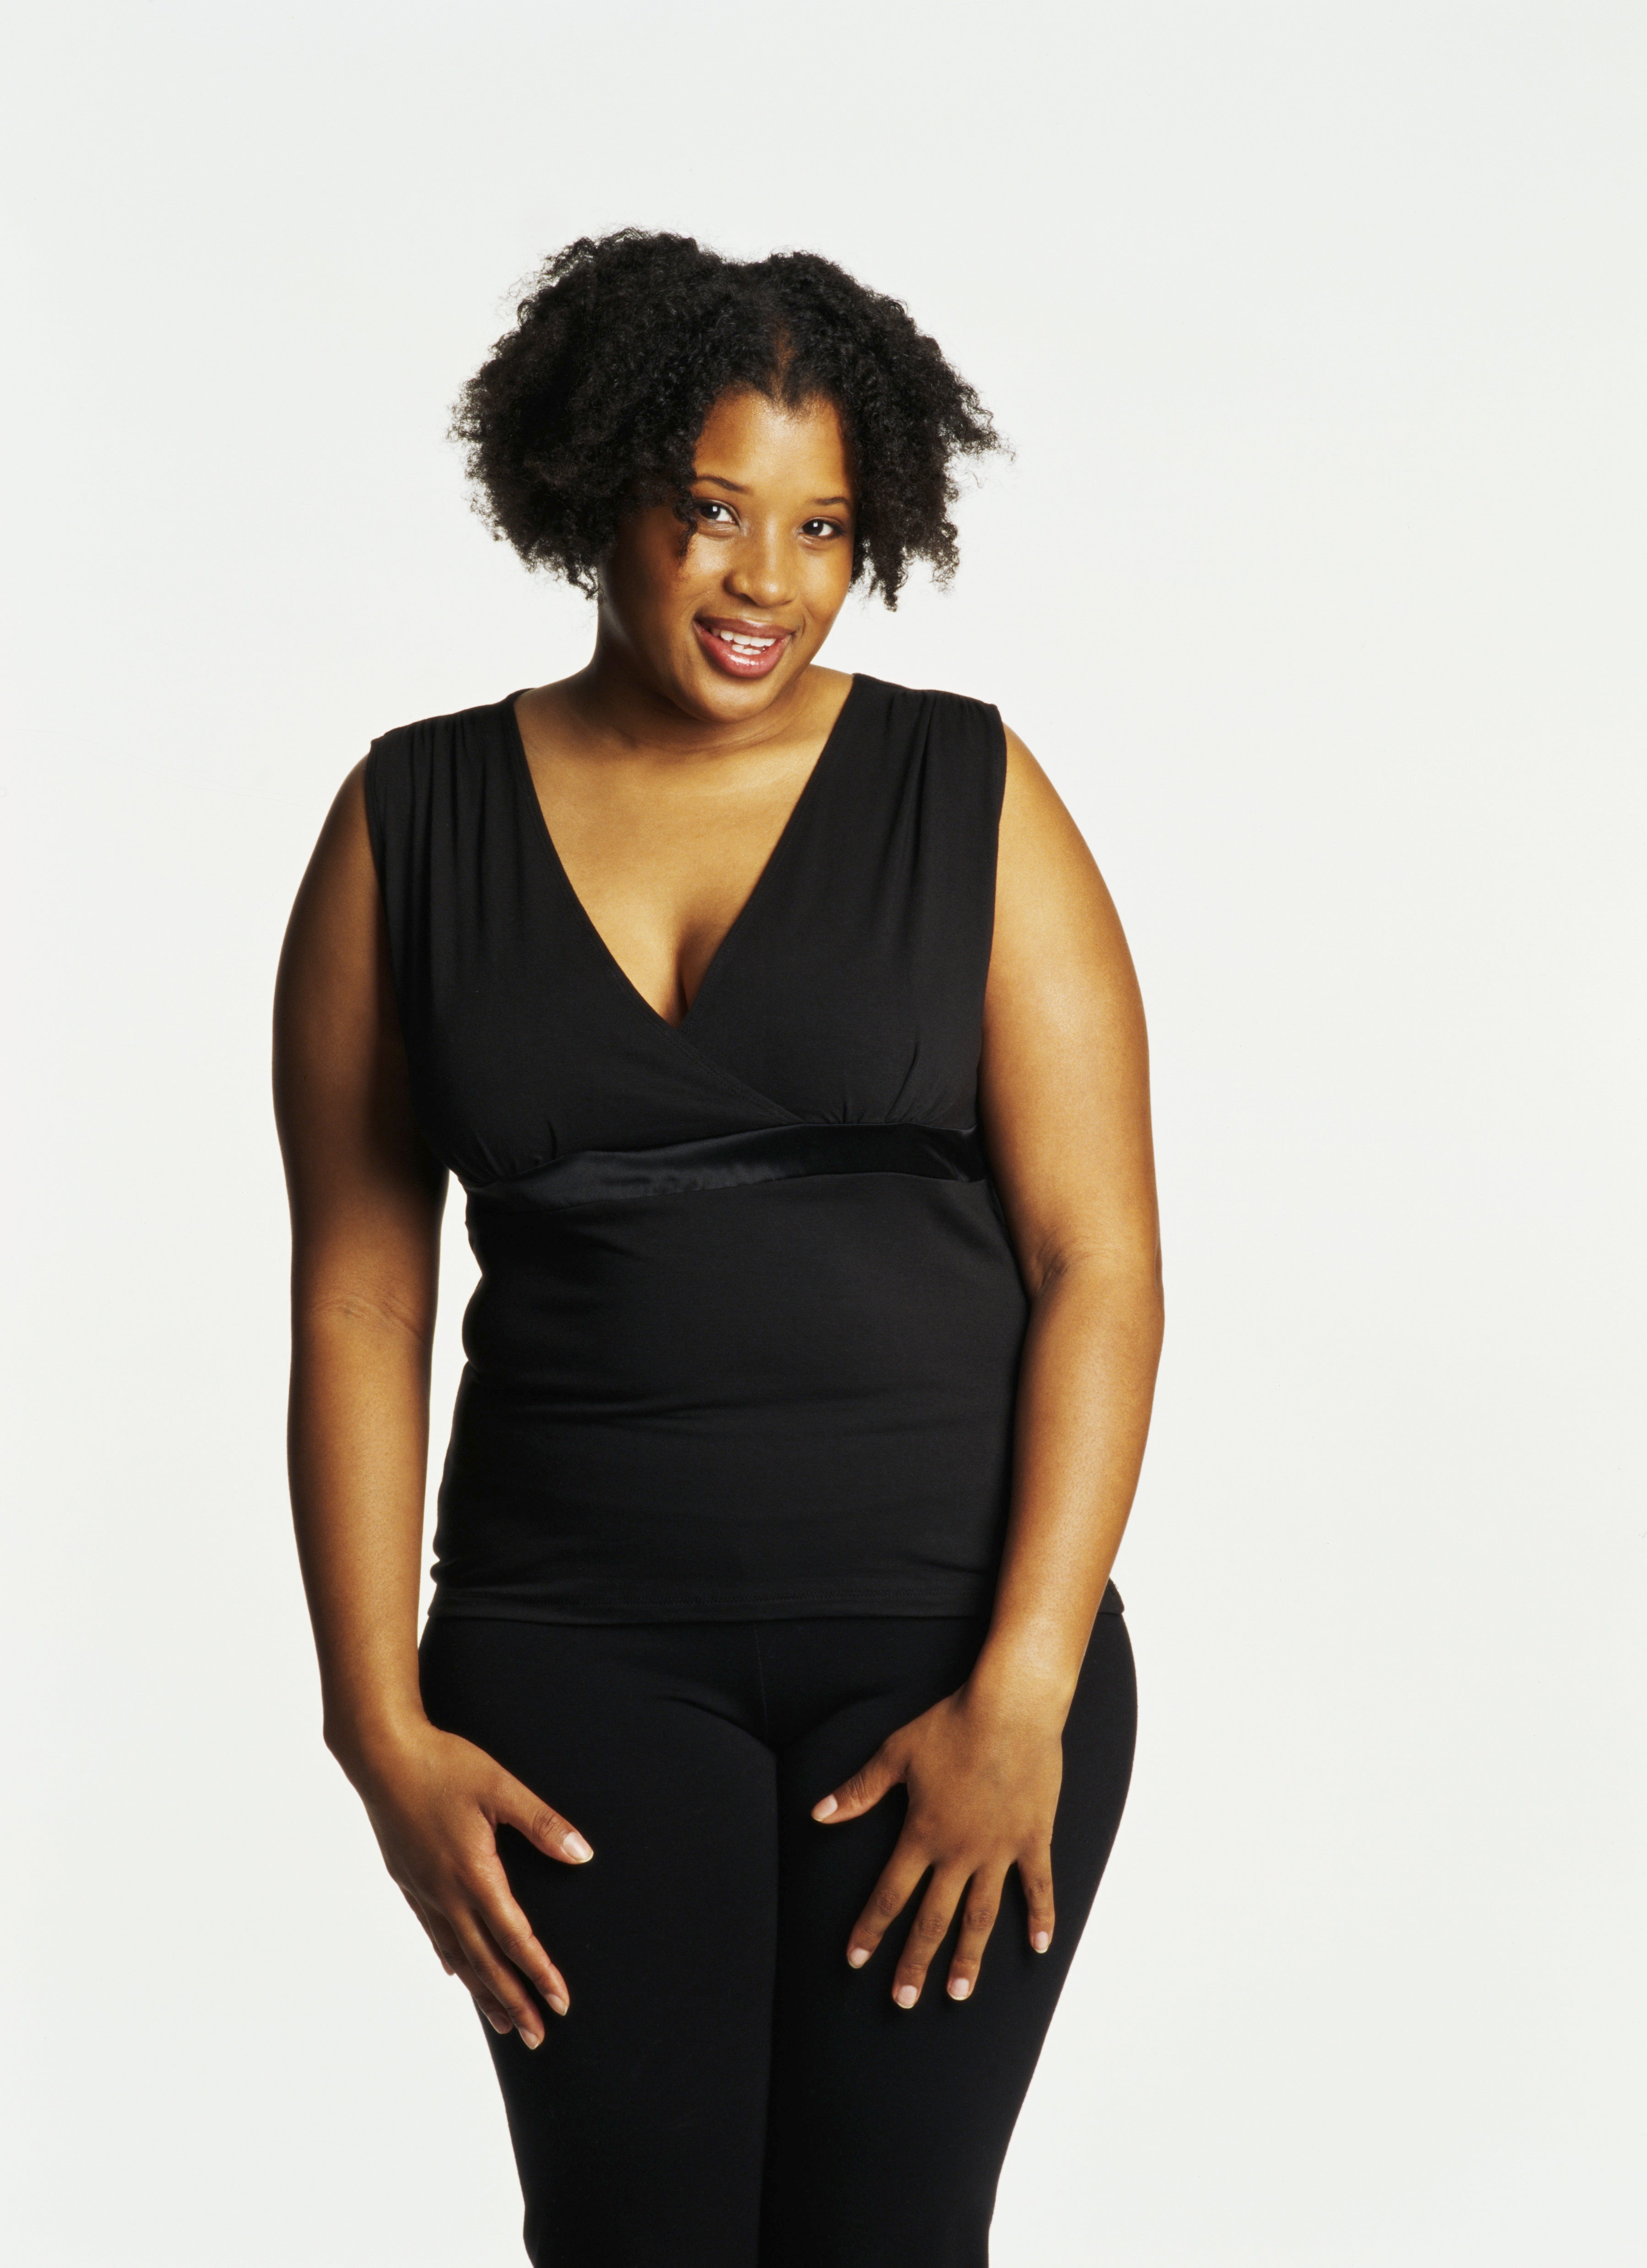 What's the Biggest Fashion Challenge Curvy Women Face?
